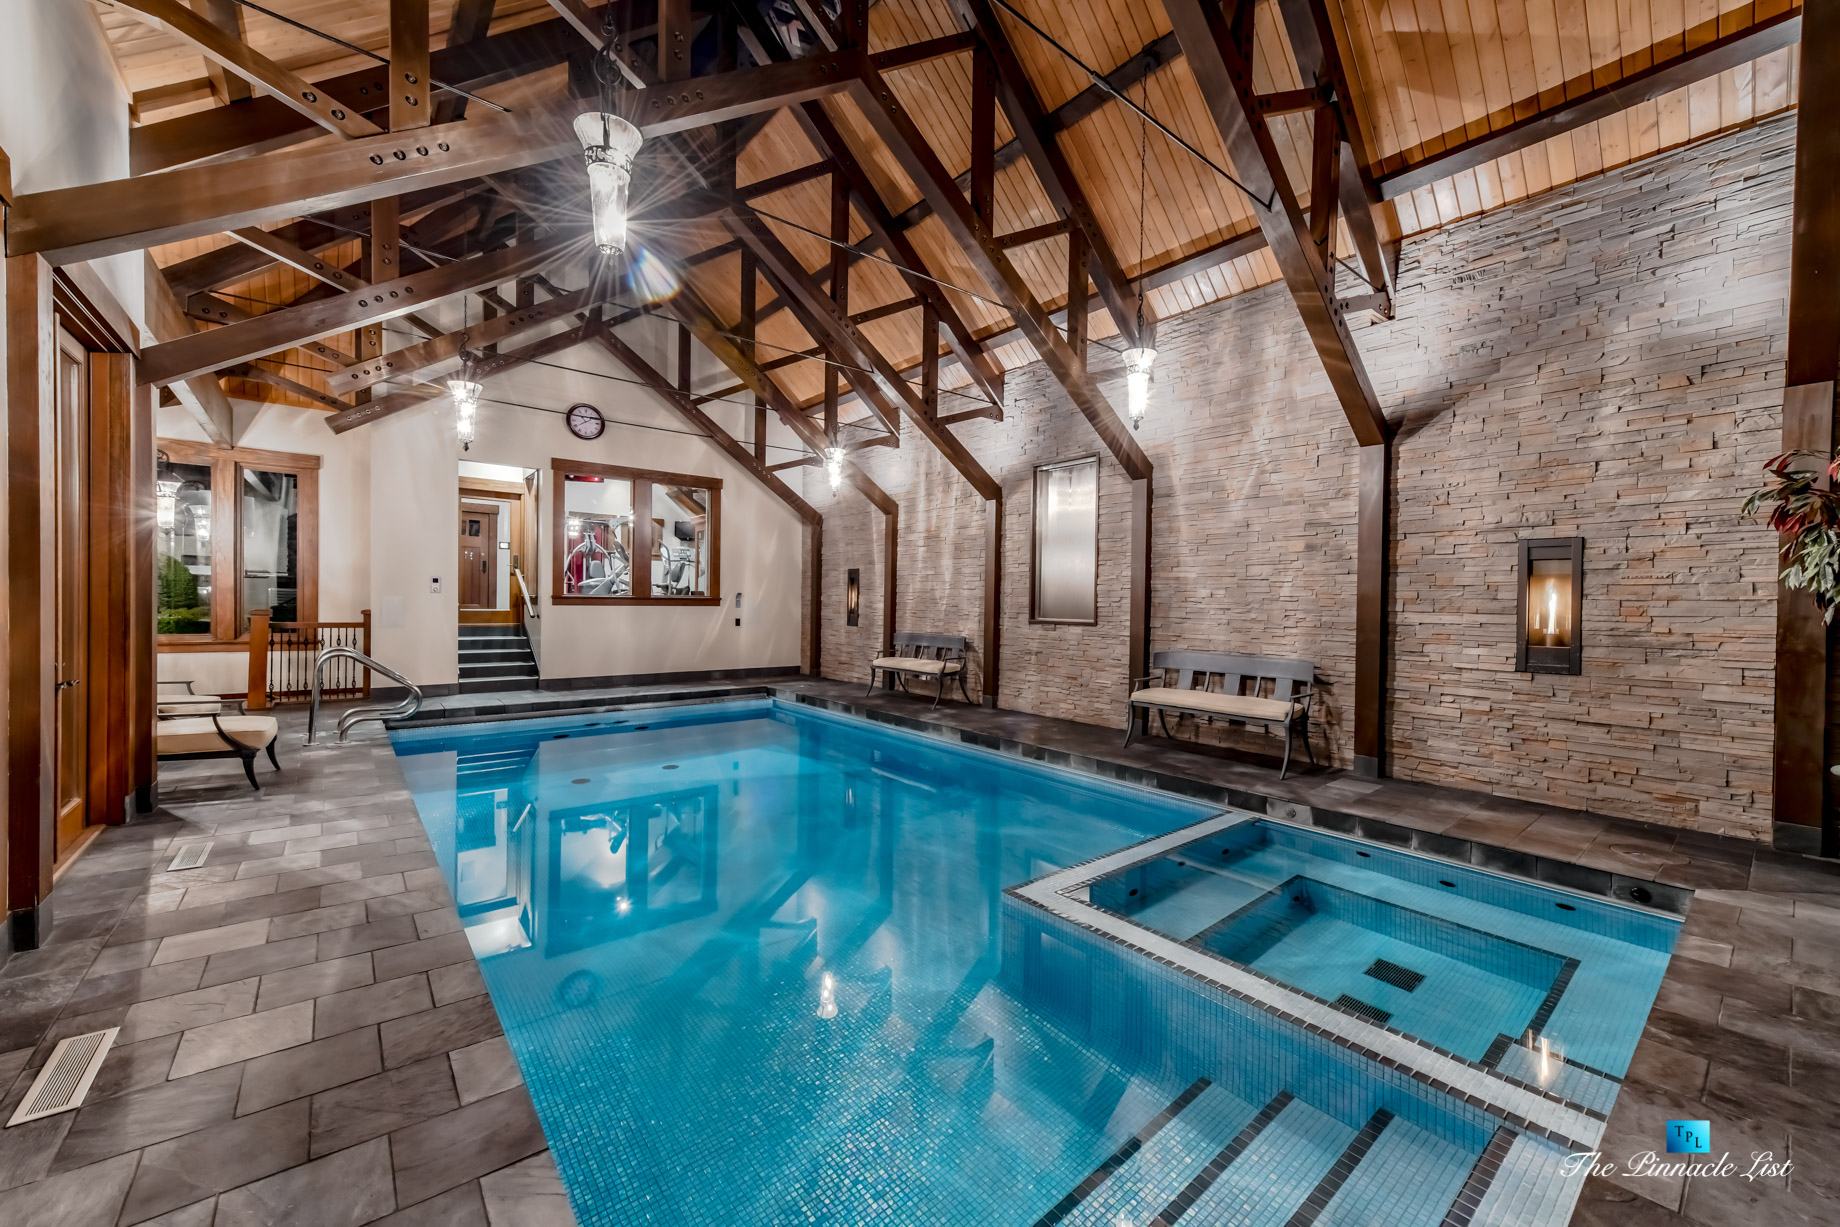 3053 Anmore Creek Way, Anmore, BC, Canada - Interior Pool and Hot Tub - Luxury Real Estate - Greater Vancouver Home